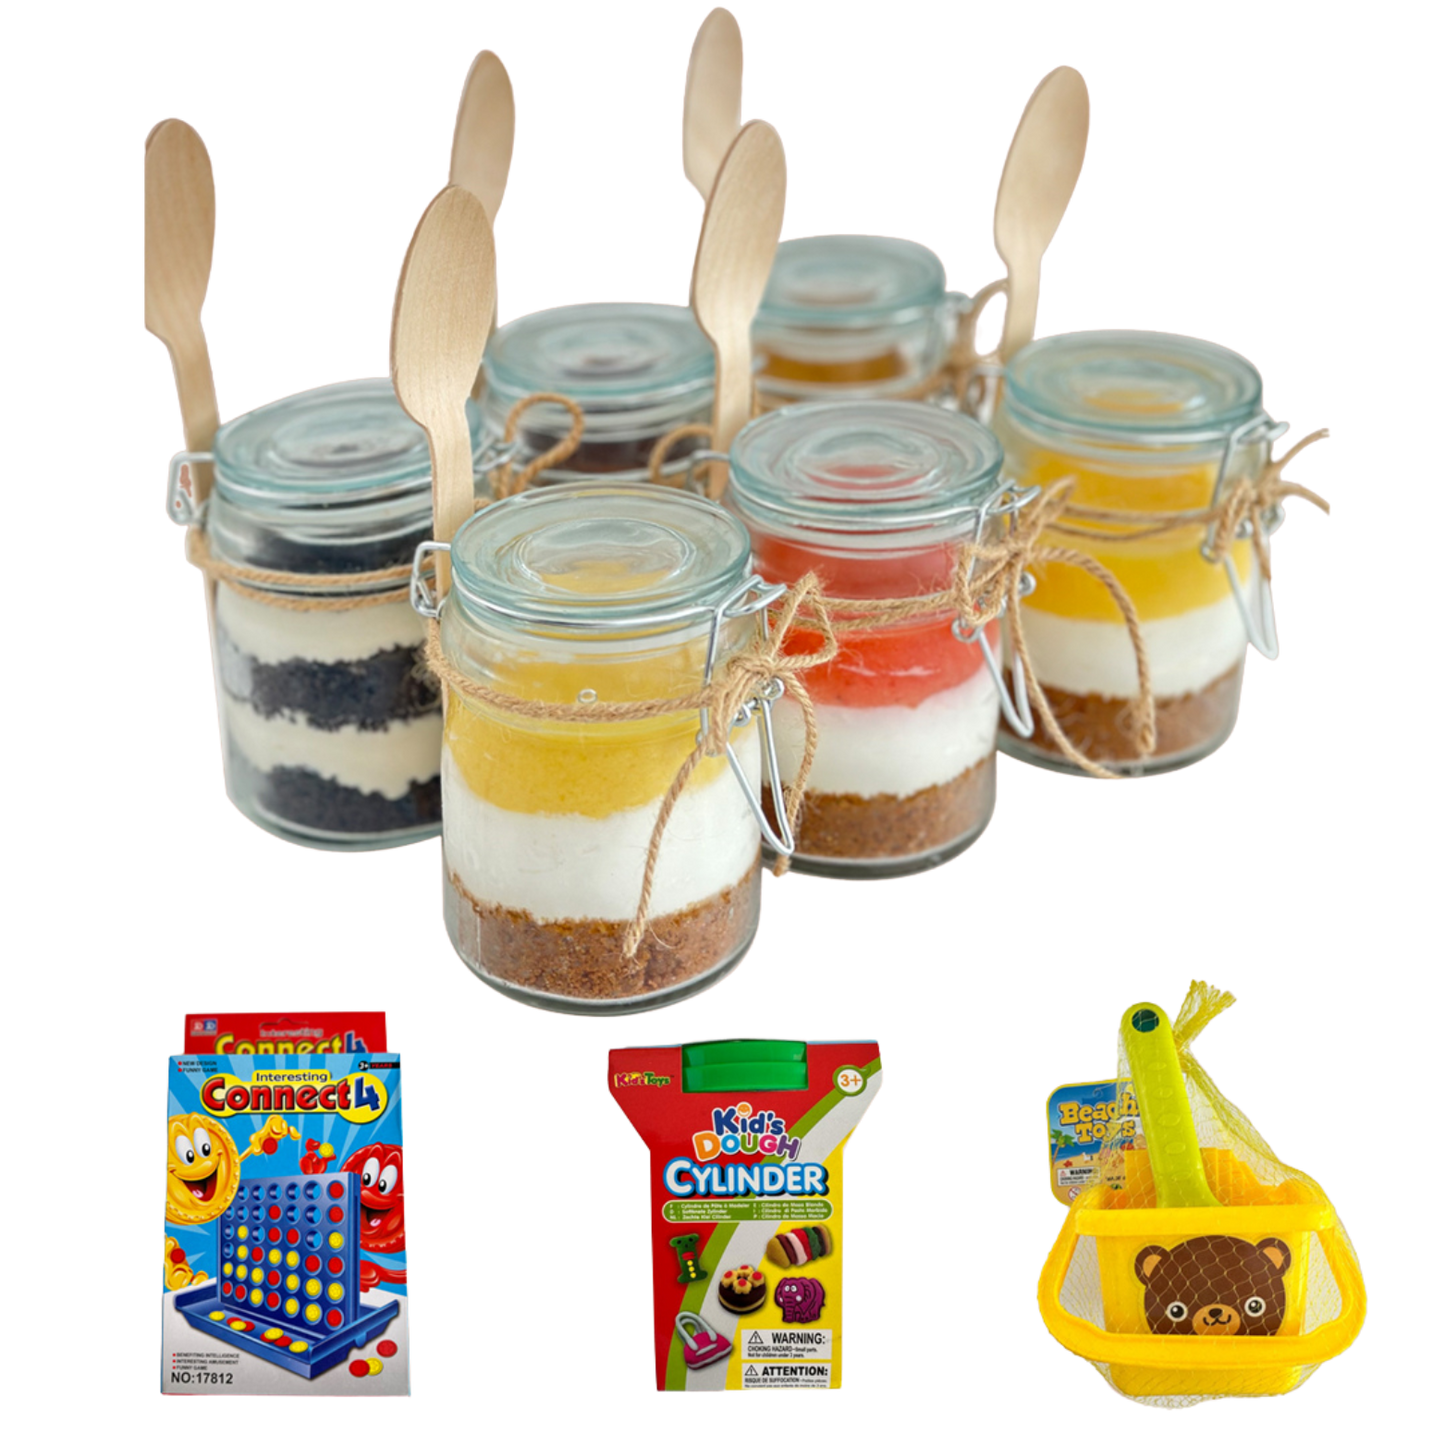 Assorted mini puddings and mini chilled cheese cake in Jars (6 pcs) & comes with 1 free toy